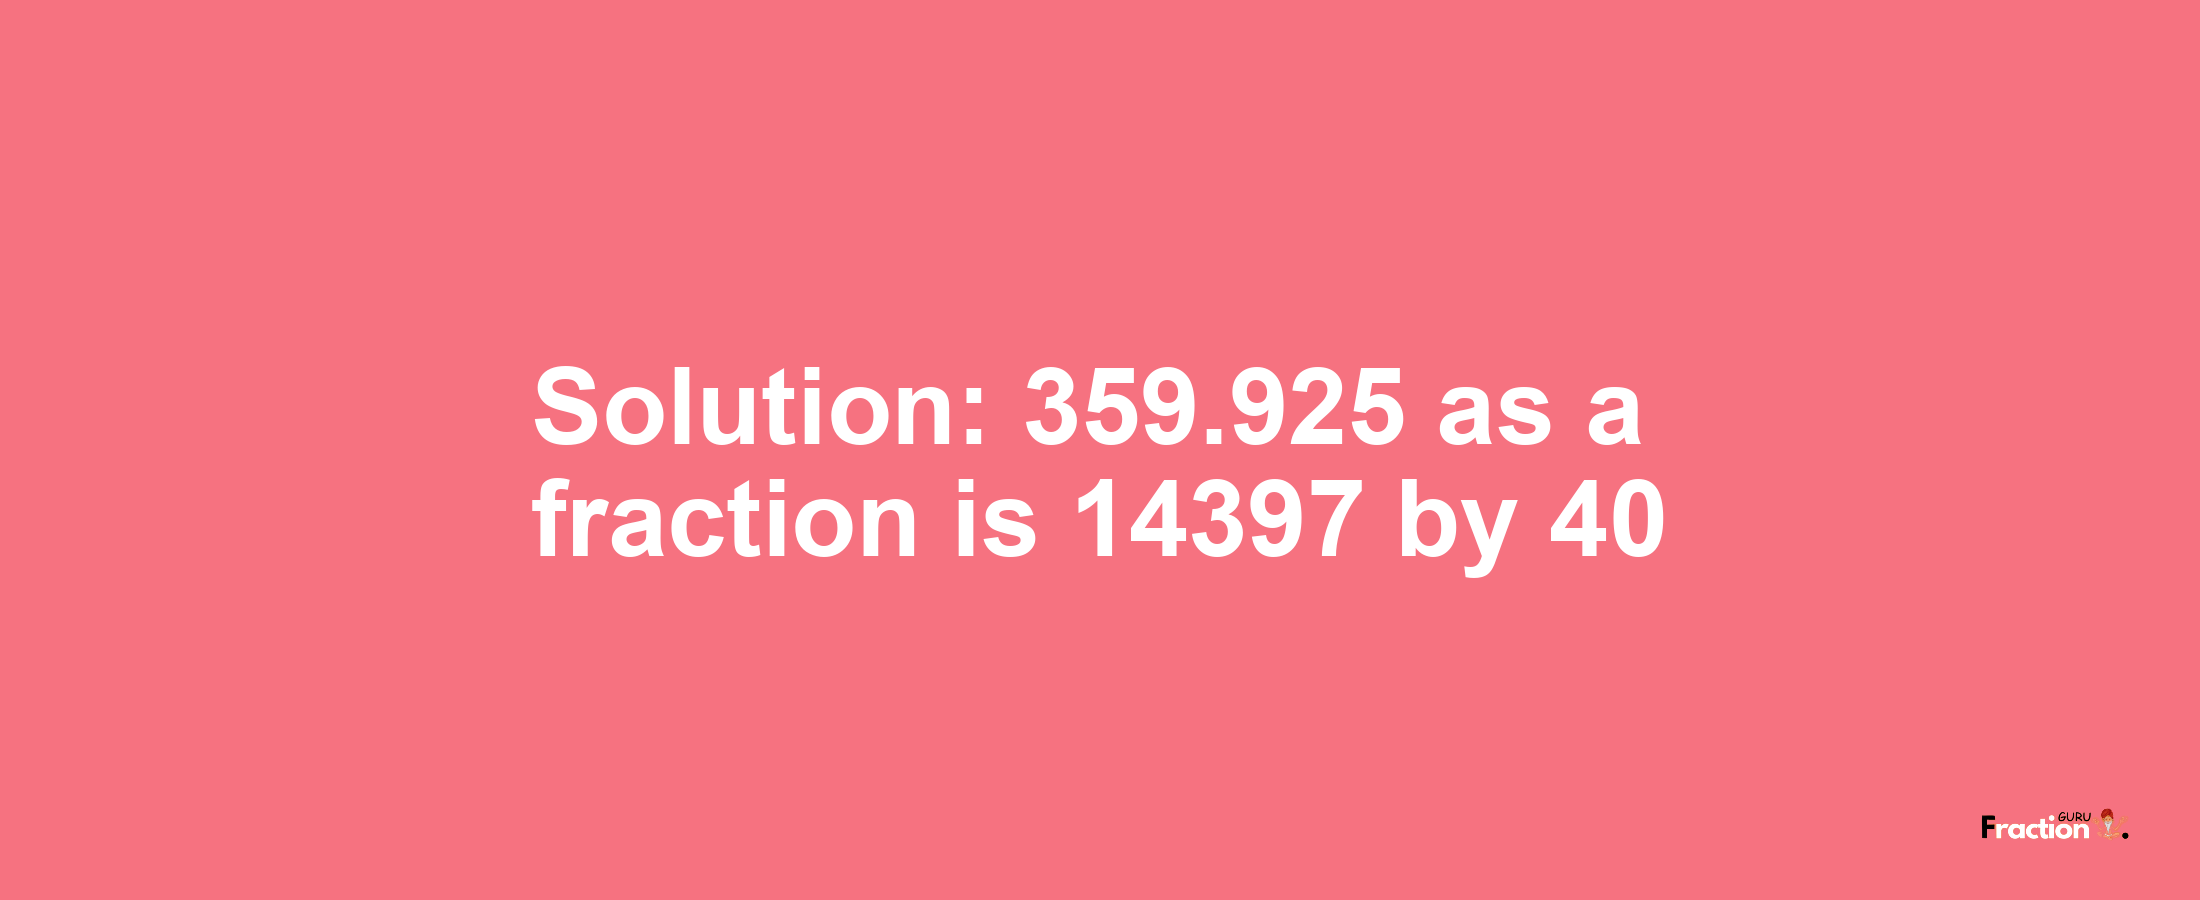 Solution:359.925 as a fraction is 14397/40